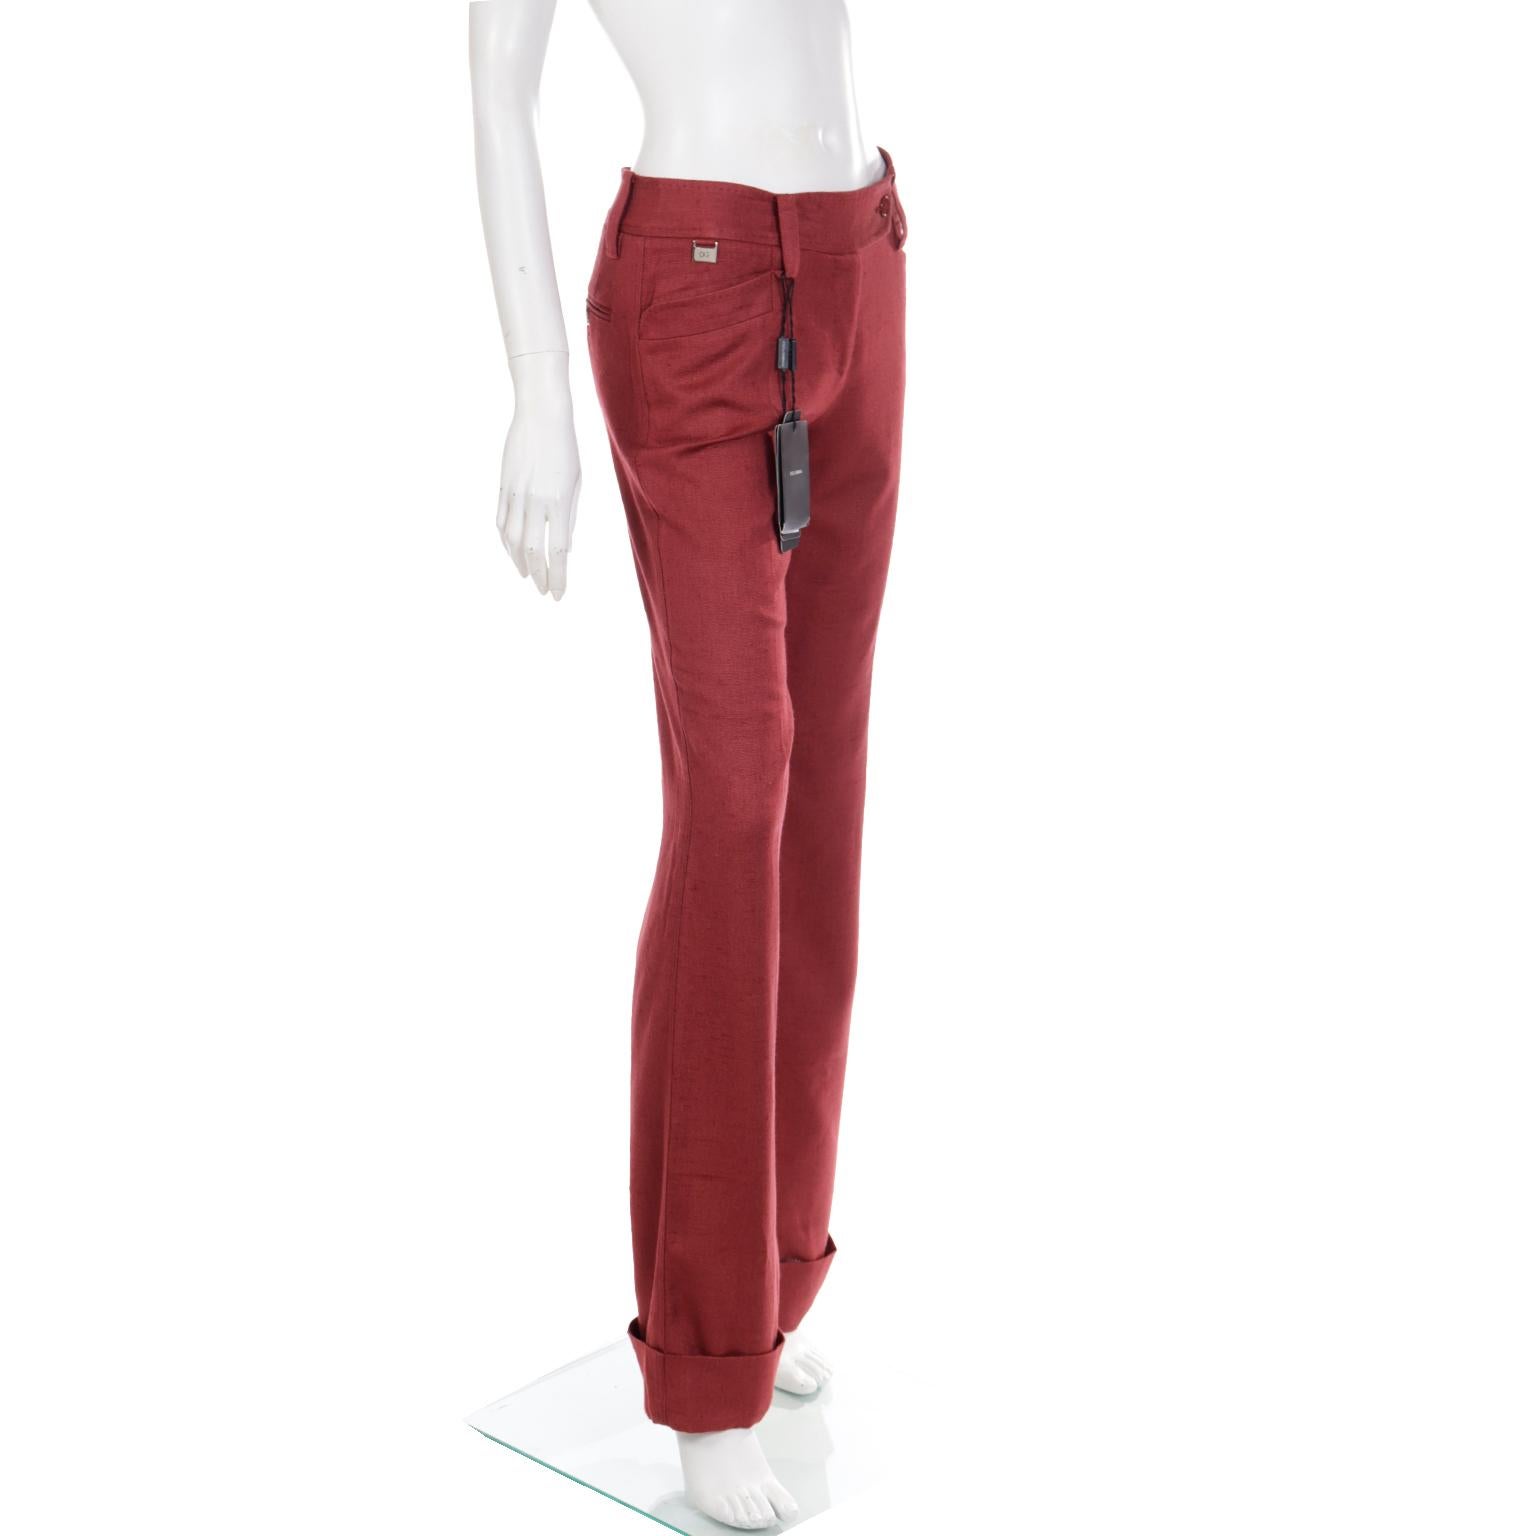 Dolce & Gabbana Cardinal Red 100% Silk Trousers Deadstock with Original Tags In Excellent Condition For Sale In Portland, OR